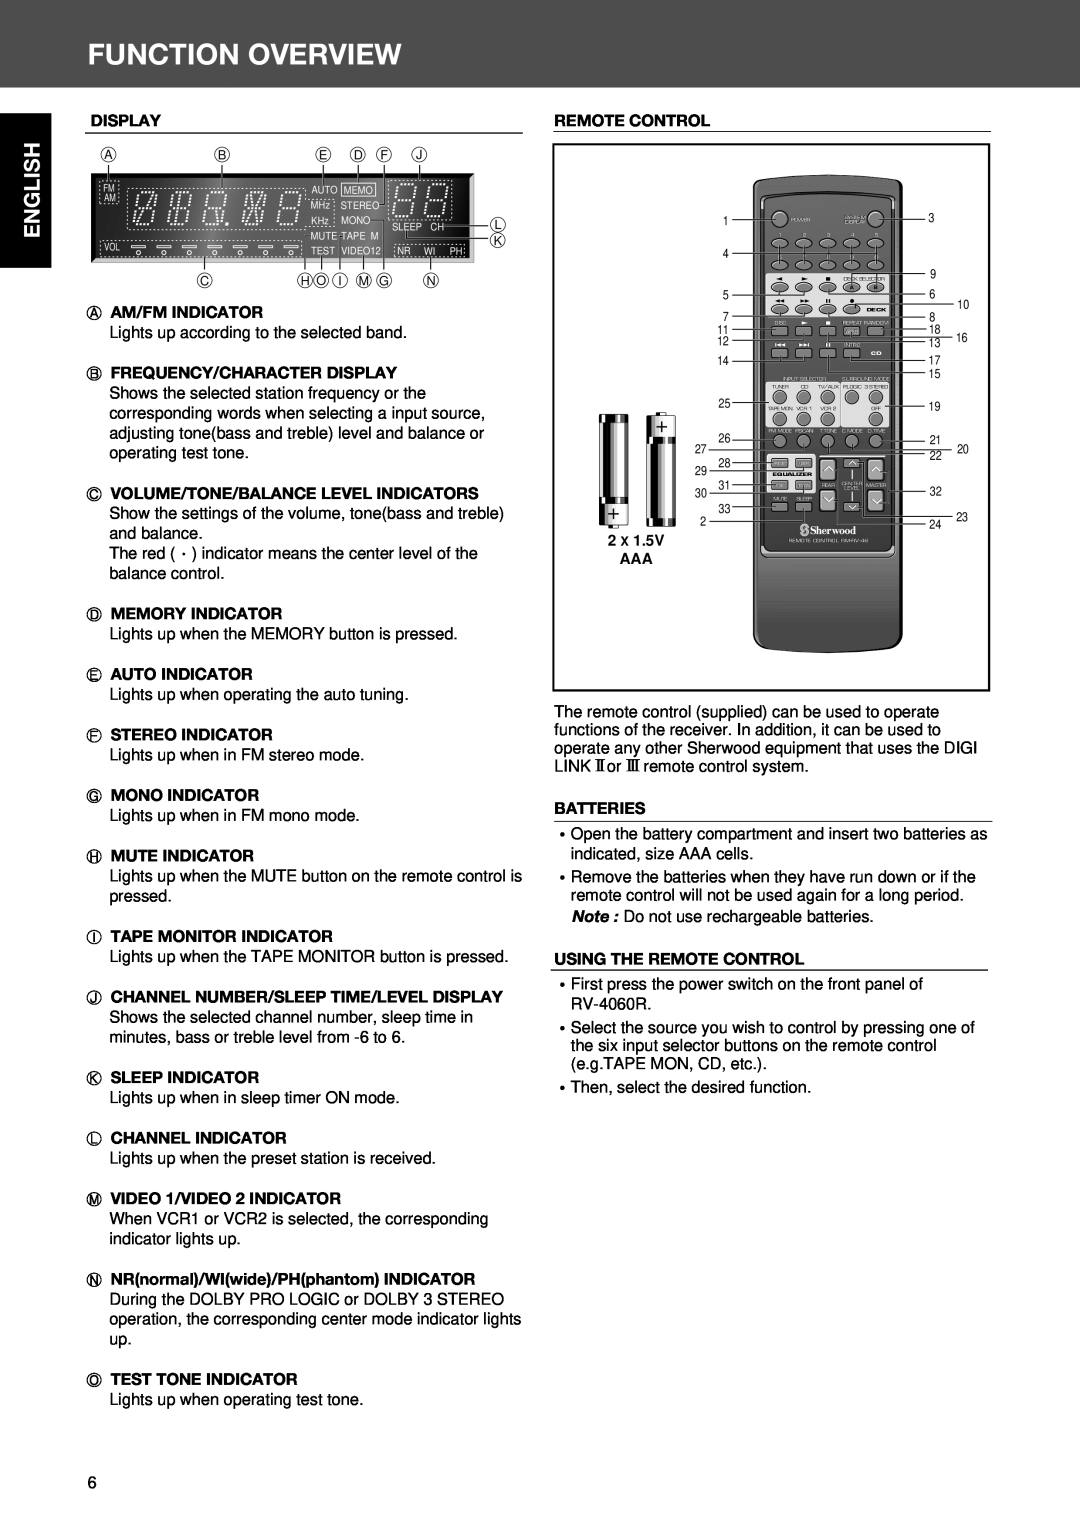 Sherwood RV-4060R manual Function Overview, English, Display 